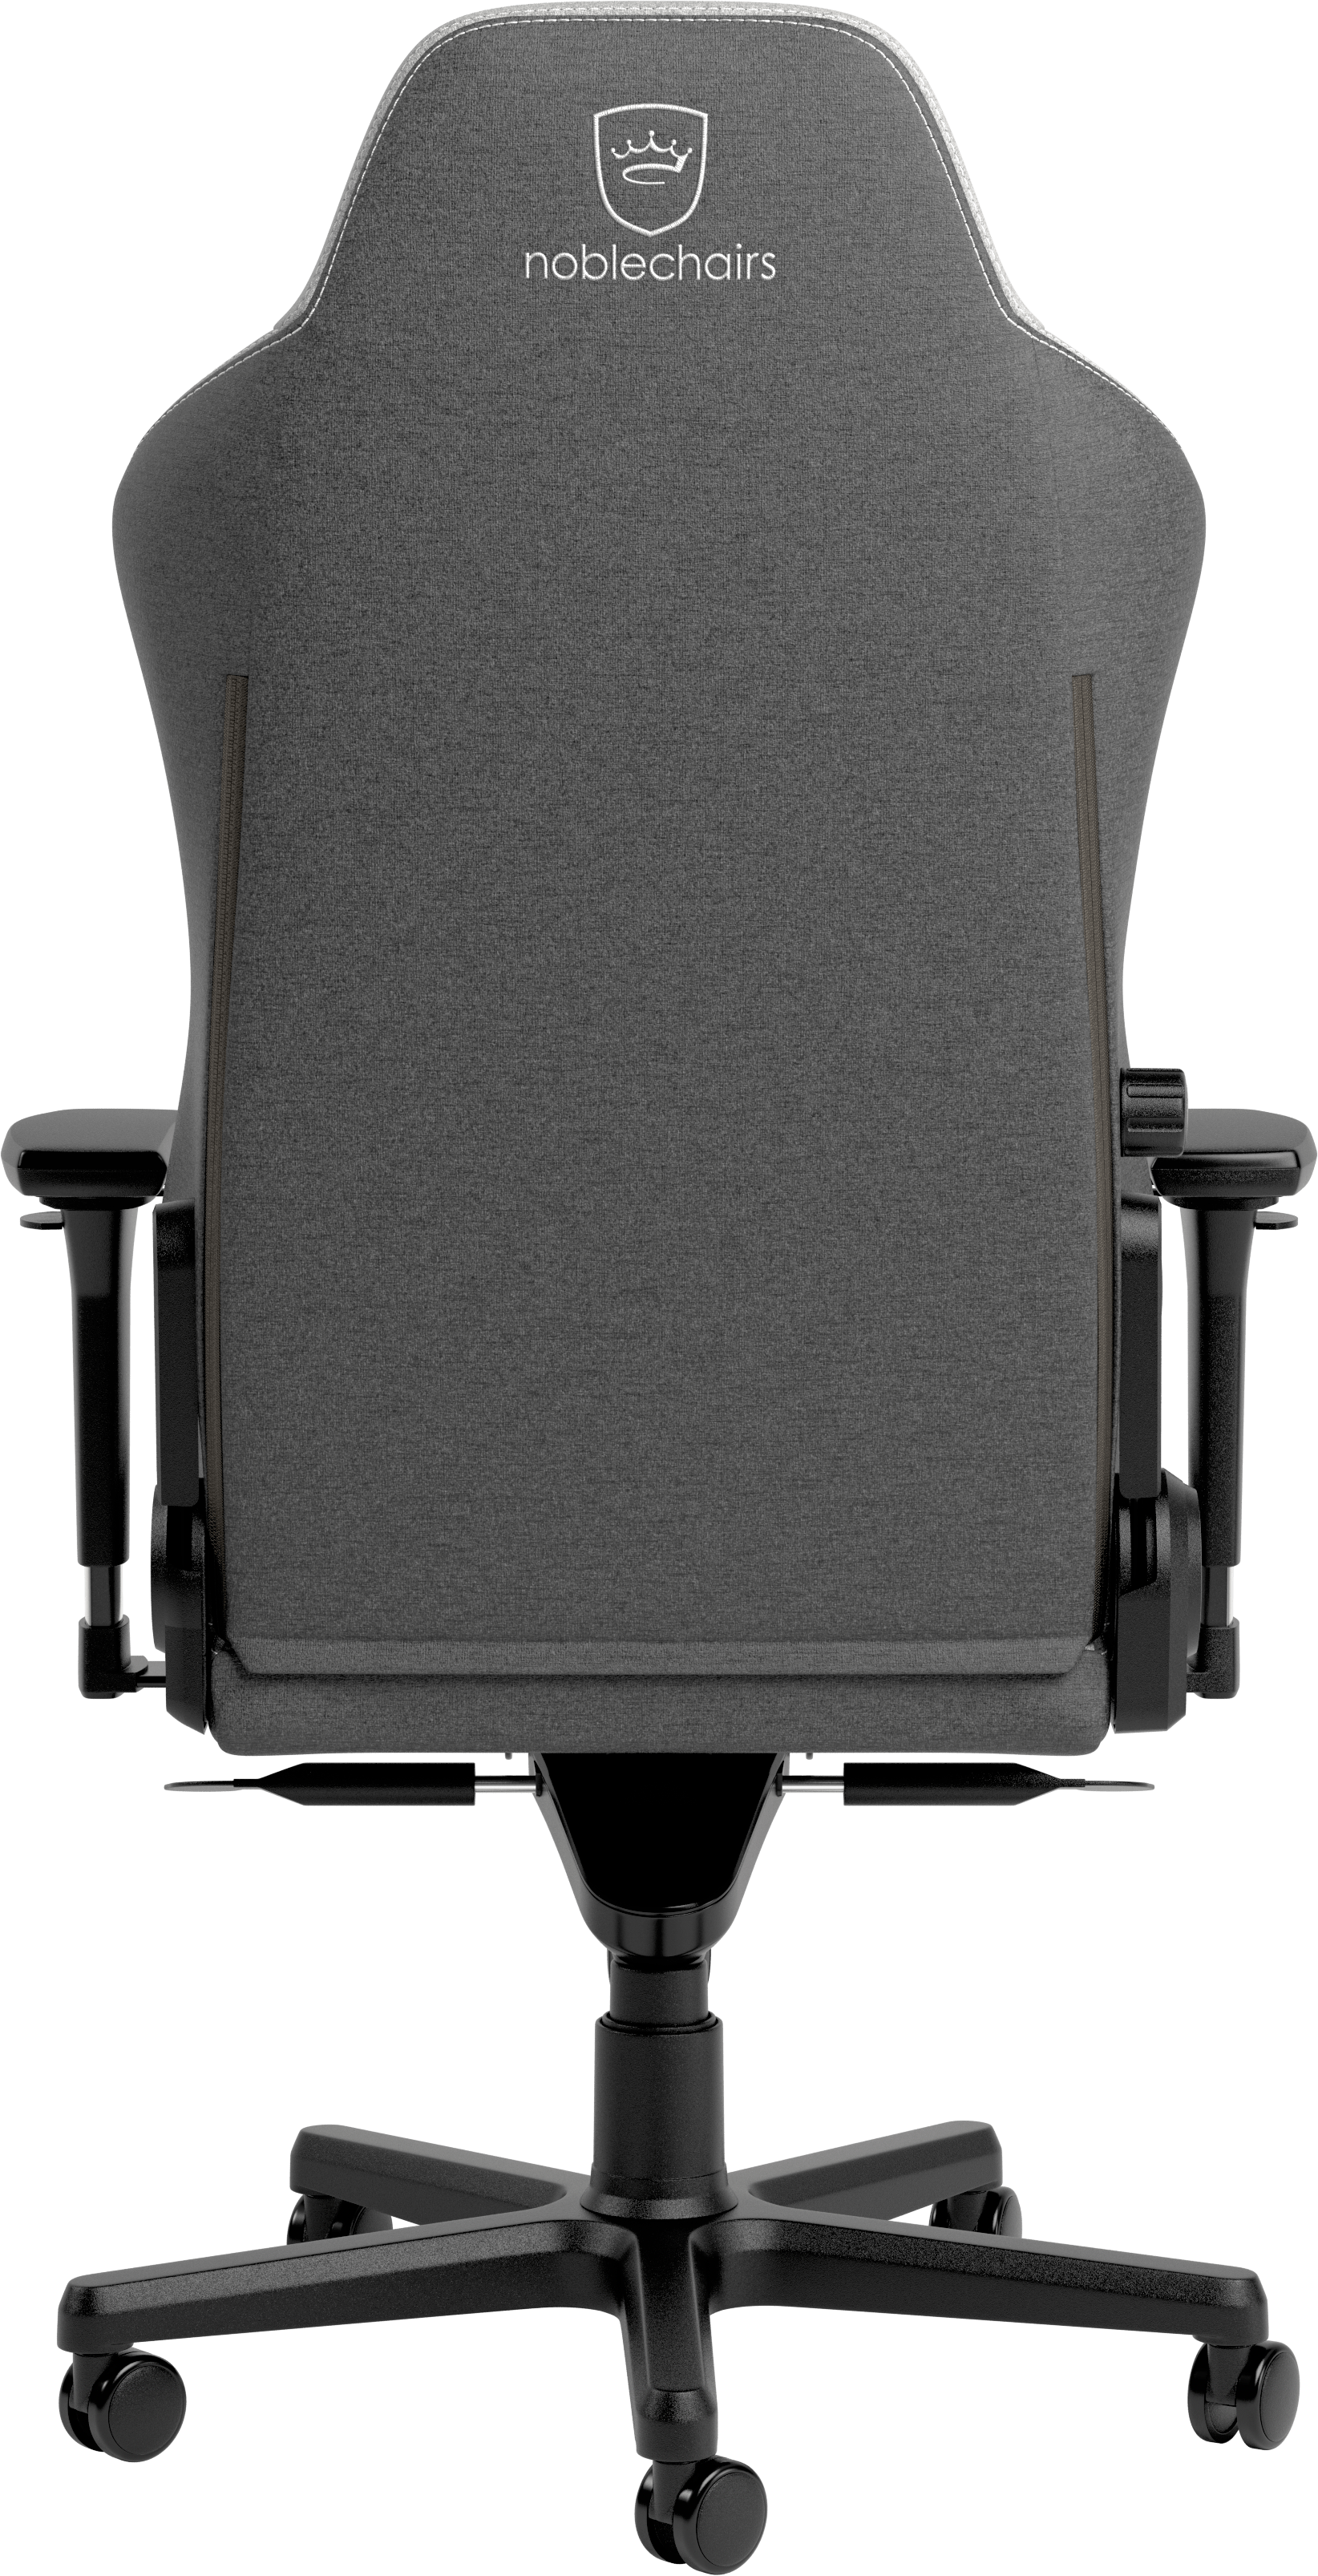 noblechairs HERO TX Two Tone Gray Limited Edition fabric cover